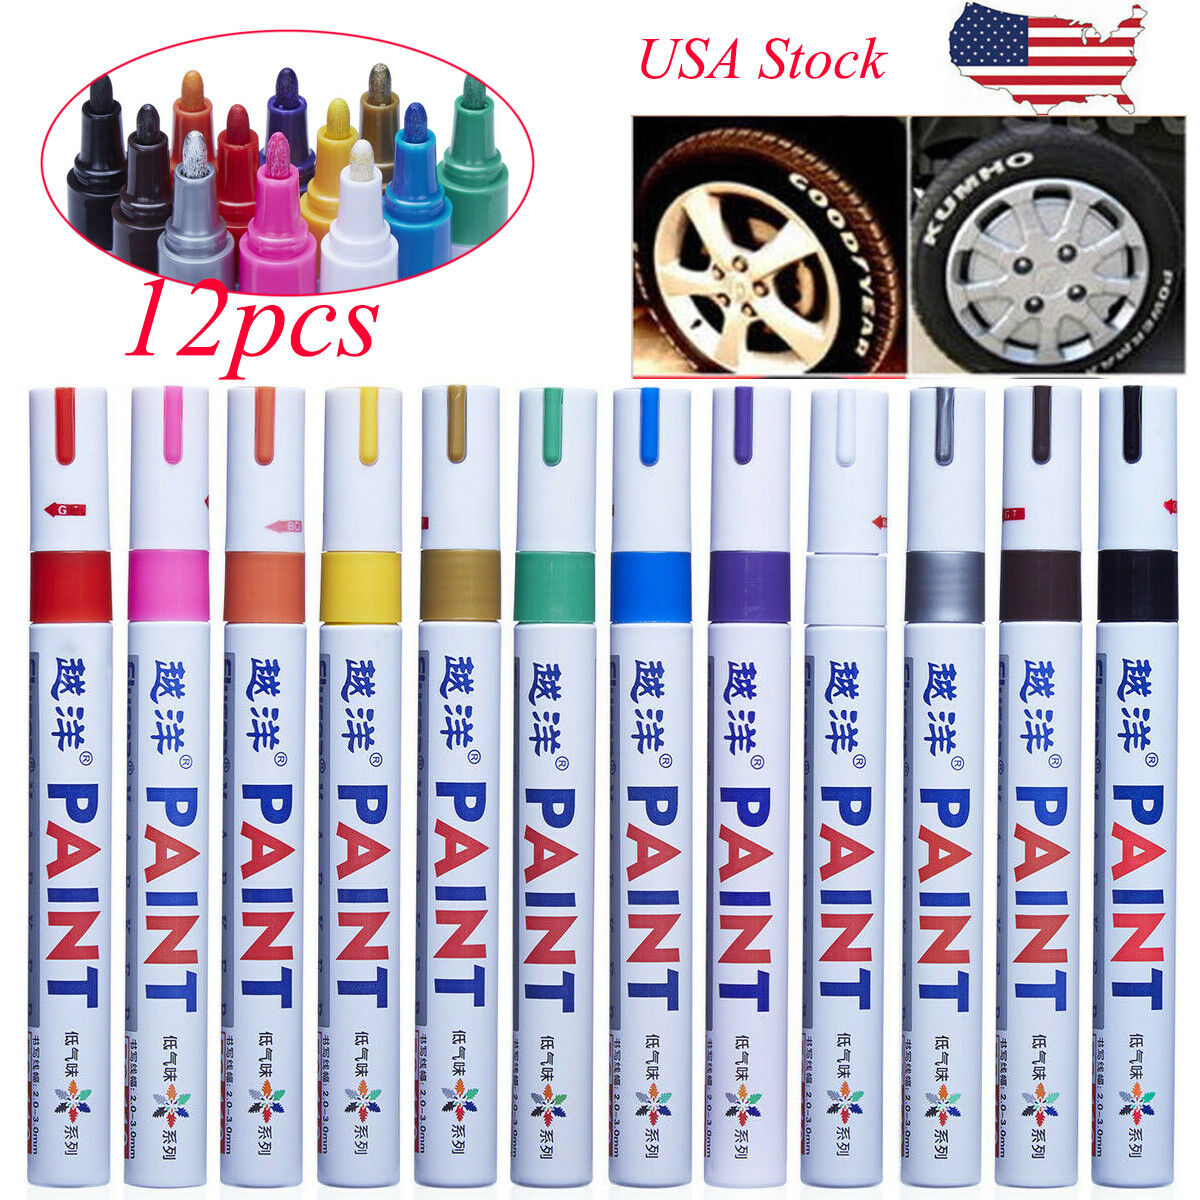 12pcs Waterproof Permanent Paint Marker Pen for Car Tyre Tire Tread Rubber Metal Unbranded Does Not Apply